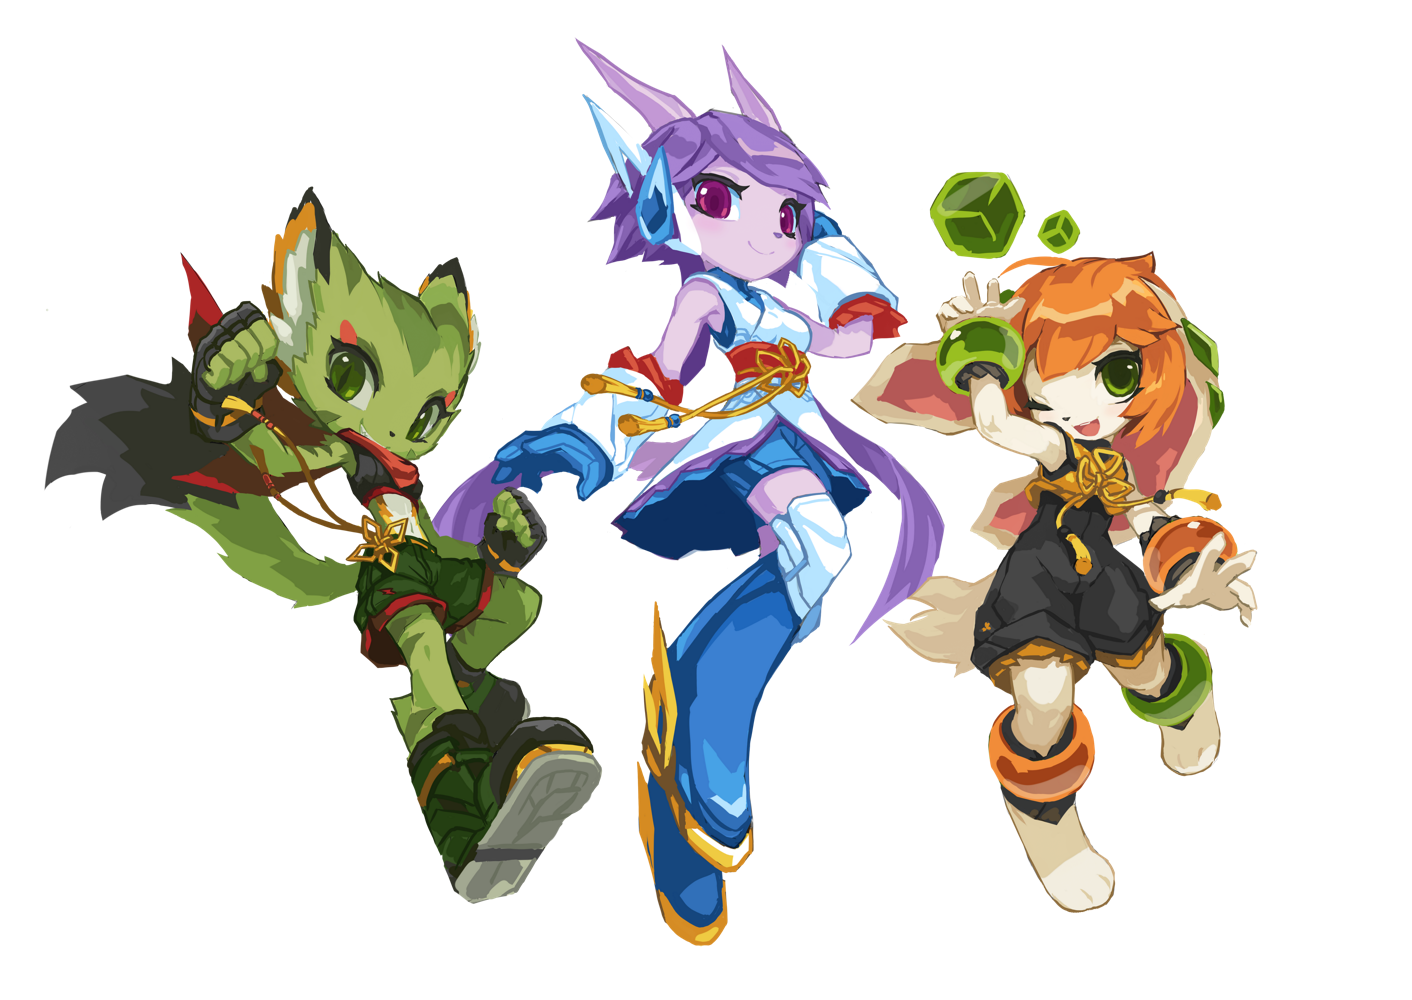 Freedom Planet High Quality Background on Wallpapers Vista